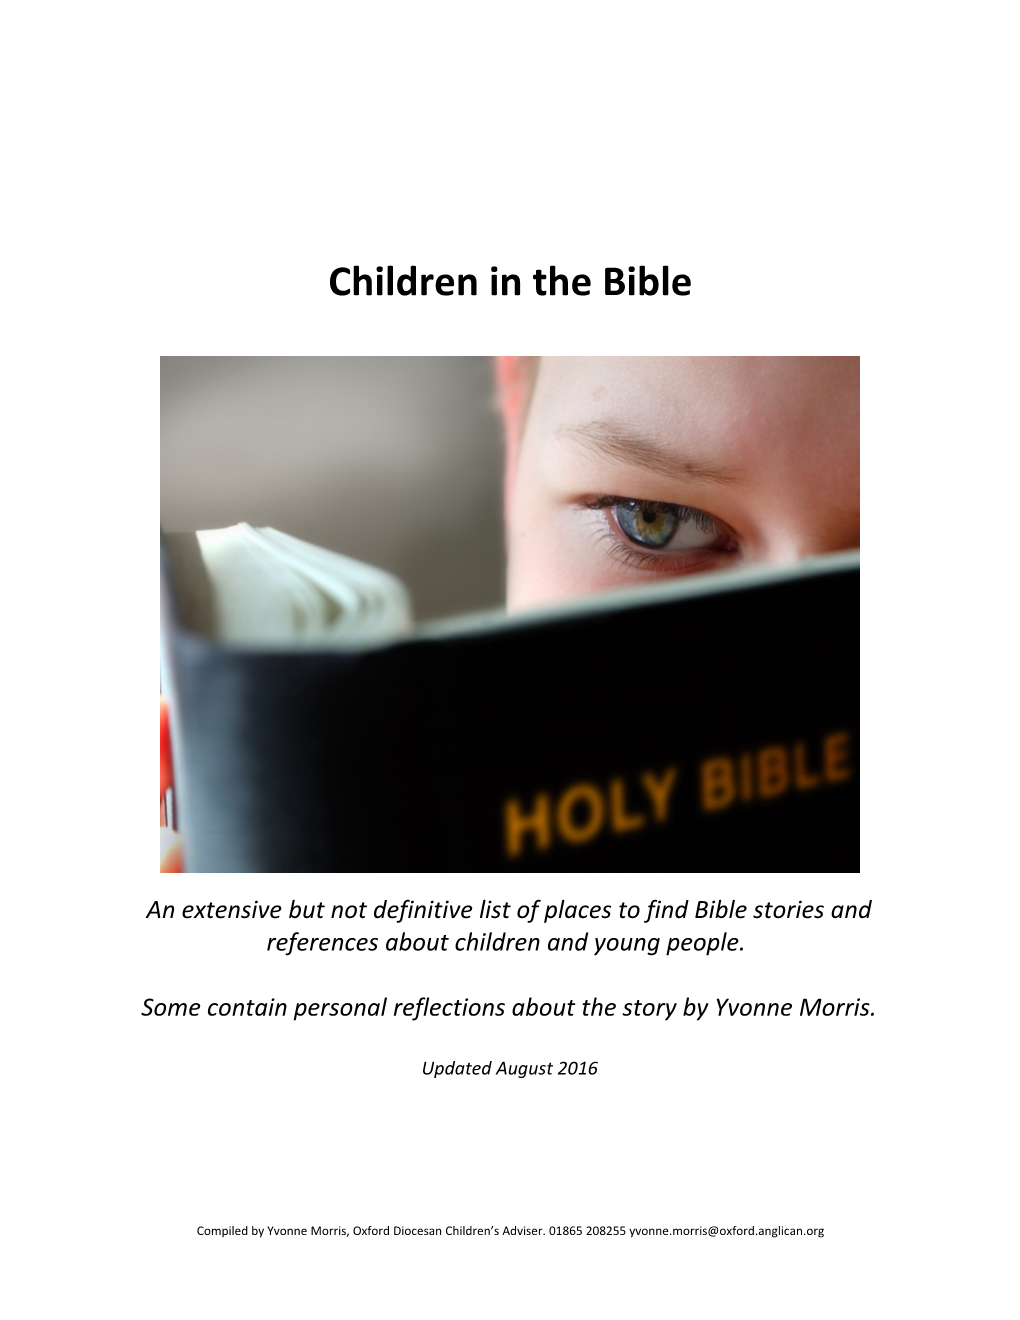 Children in the Bible: What Do Their Stories Mean for Our Missional Context